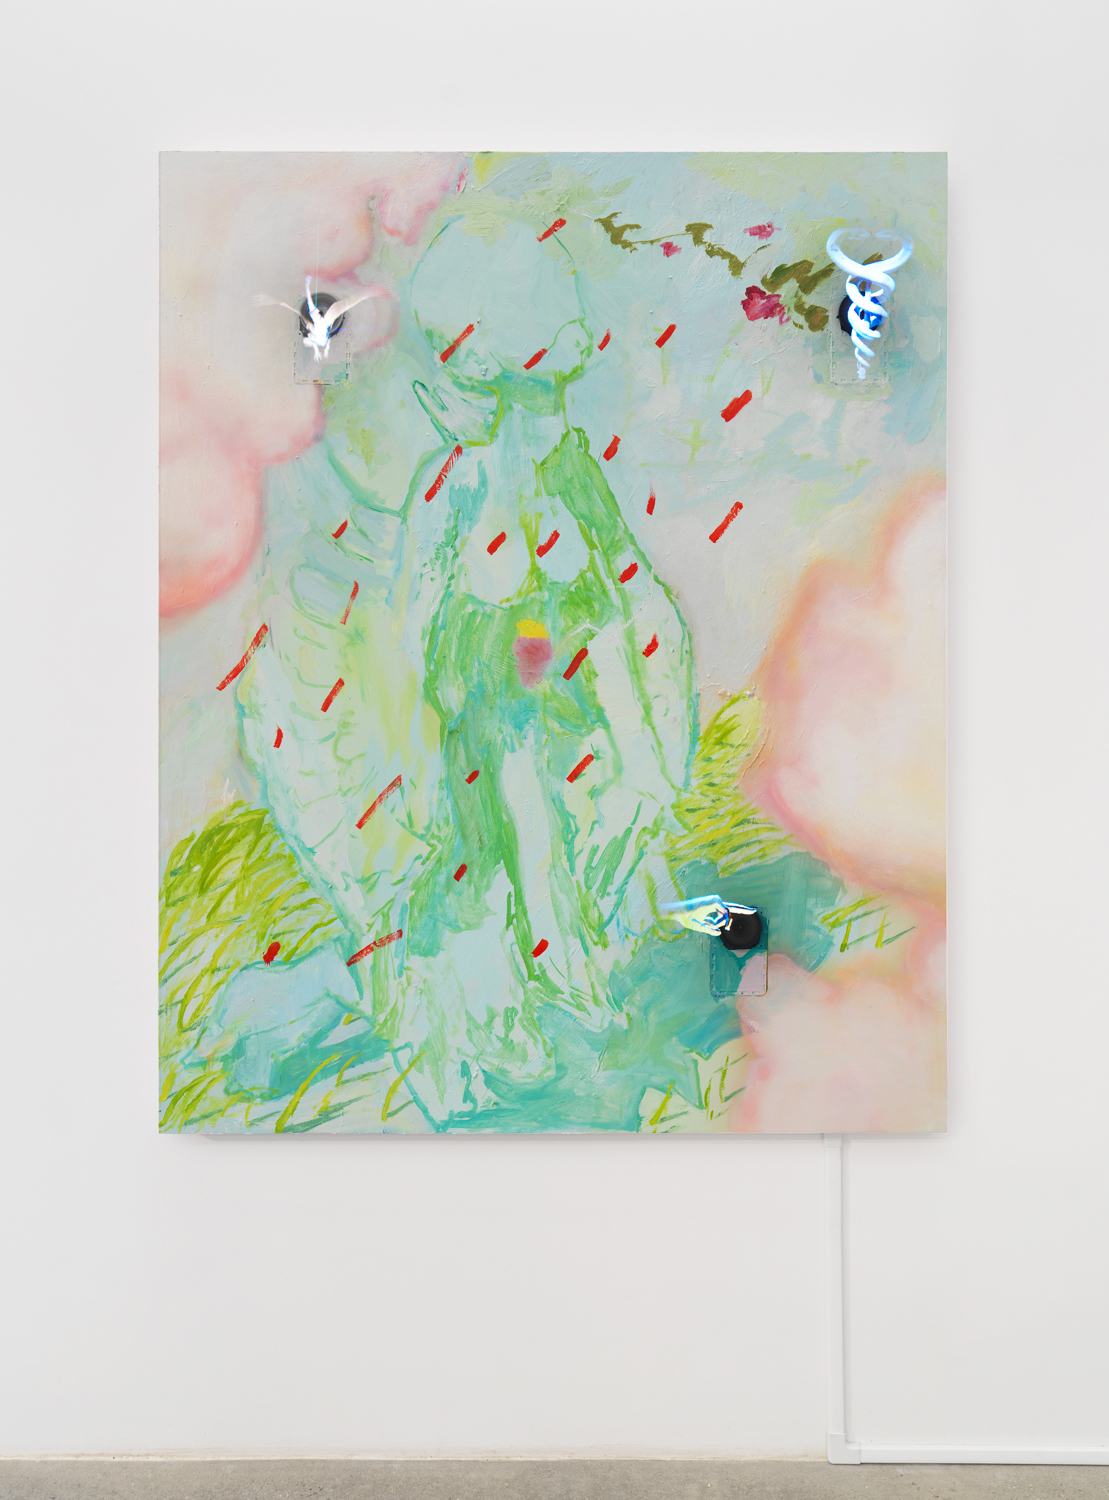 Rachel Rossin, Sub, 2021, Oil, airbrushed acrylic, and enamel on panel with embedded holographic display, 60h x 48w in.